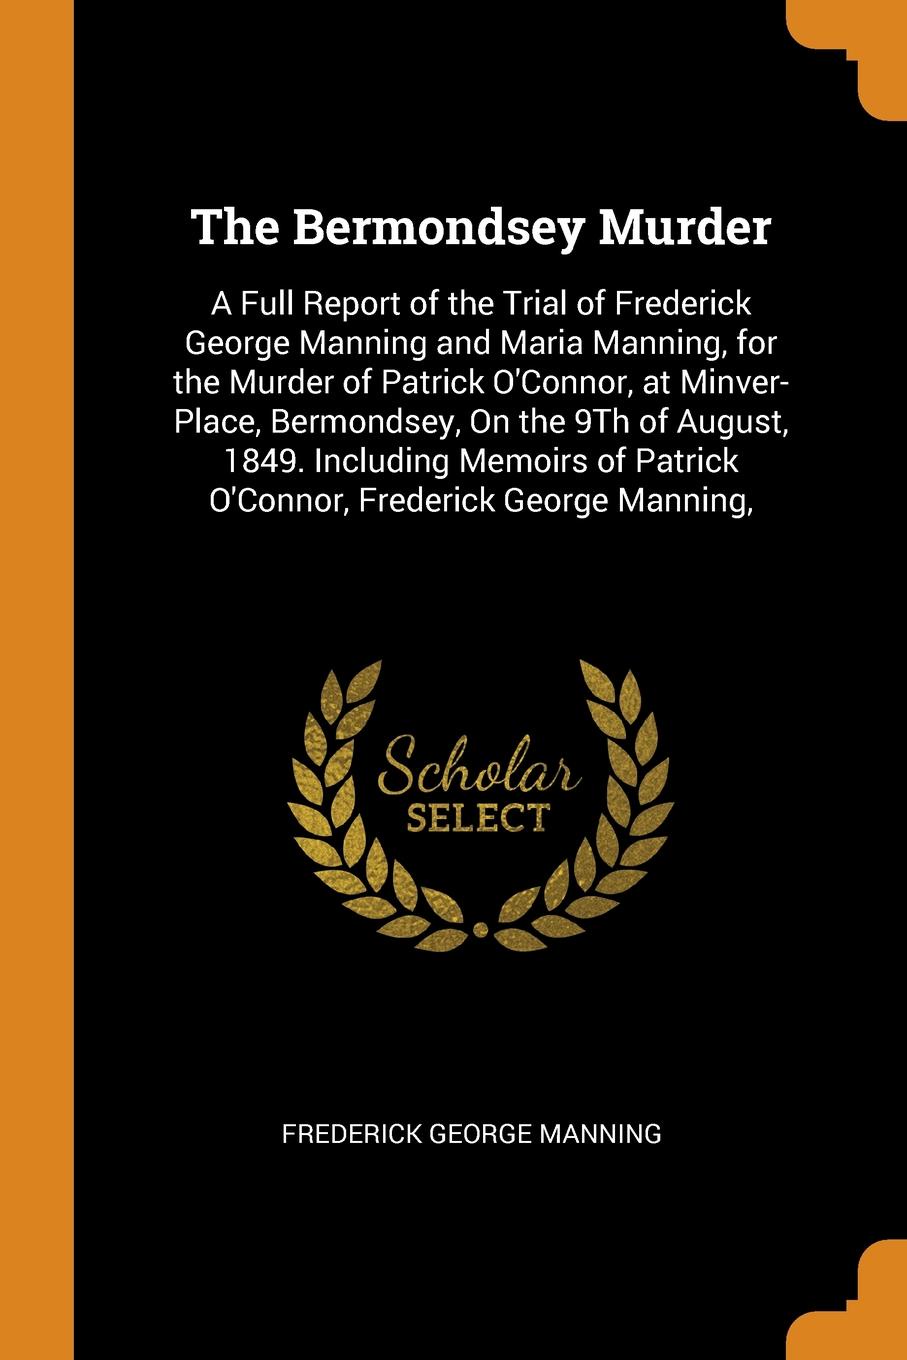 The Bermondsey Murder. A Full Report of the Trial of Frederick George Manning and Maria Manning, for the Murder of Patrick O`Connor, at Minver-Place, Bermondsey, On the 9Th of August, 1849. Including Memoirs of Patrick O`Connor, Frederick George M...